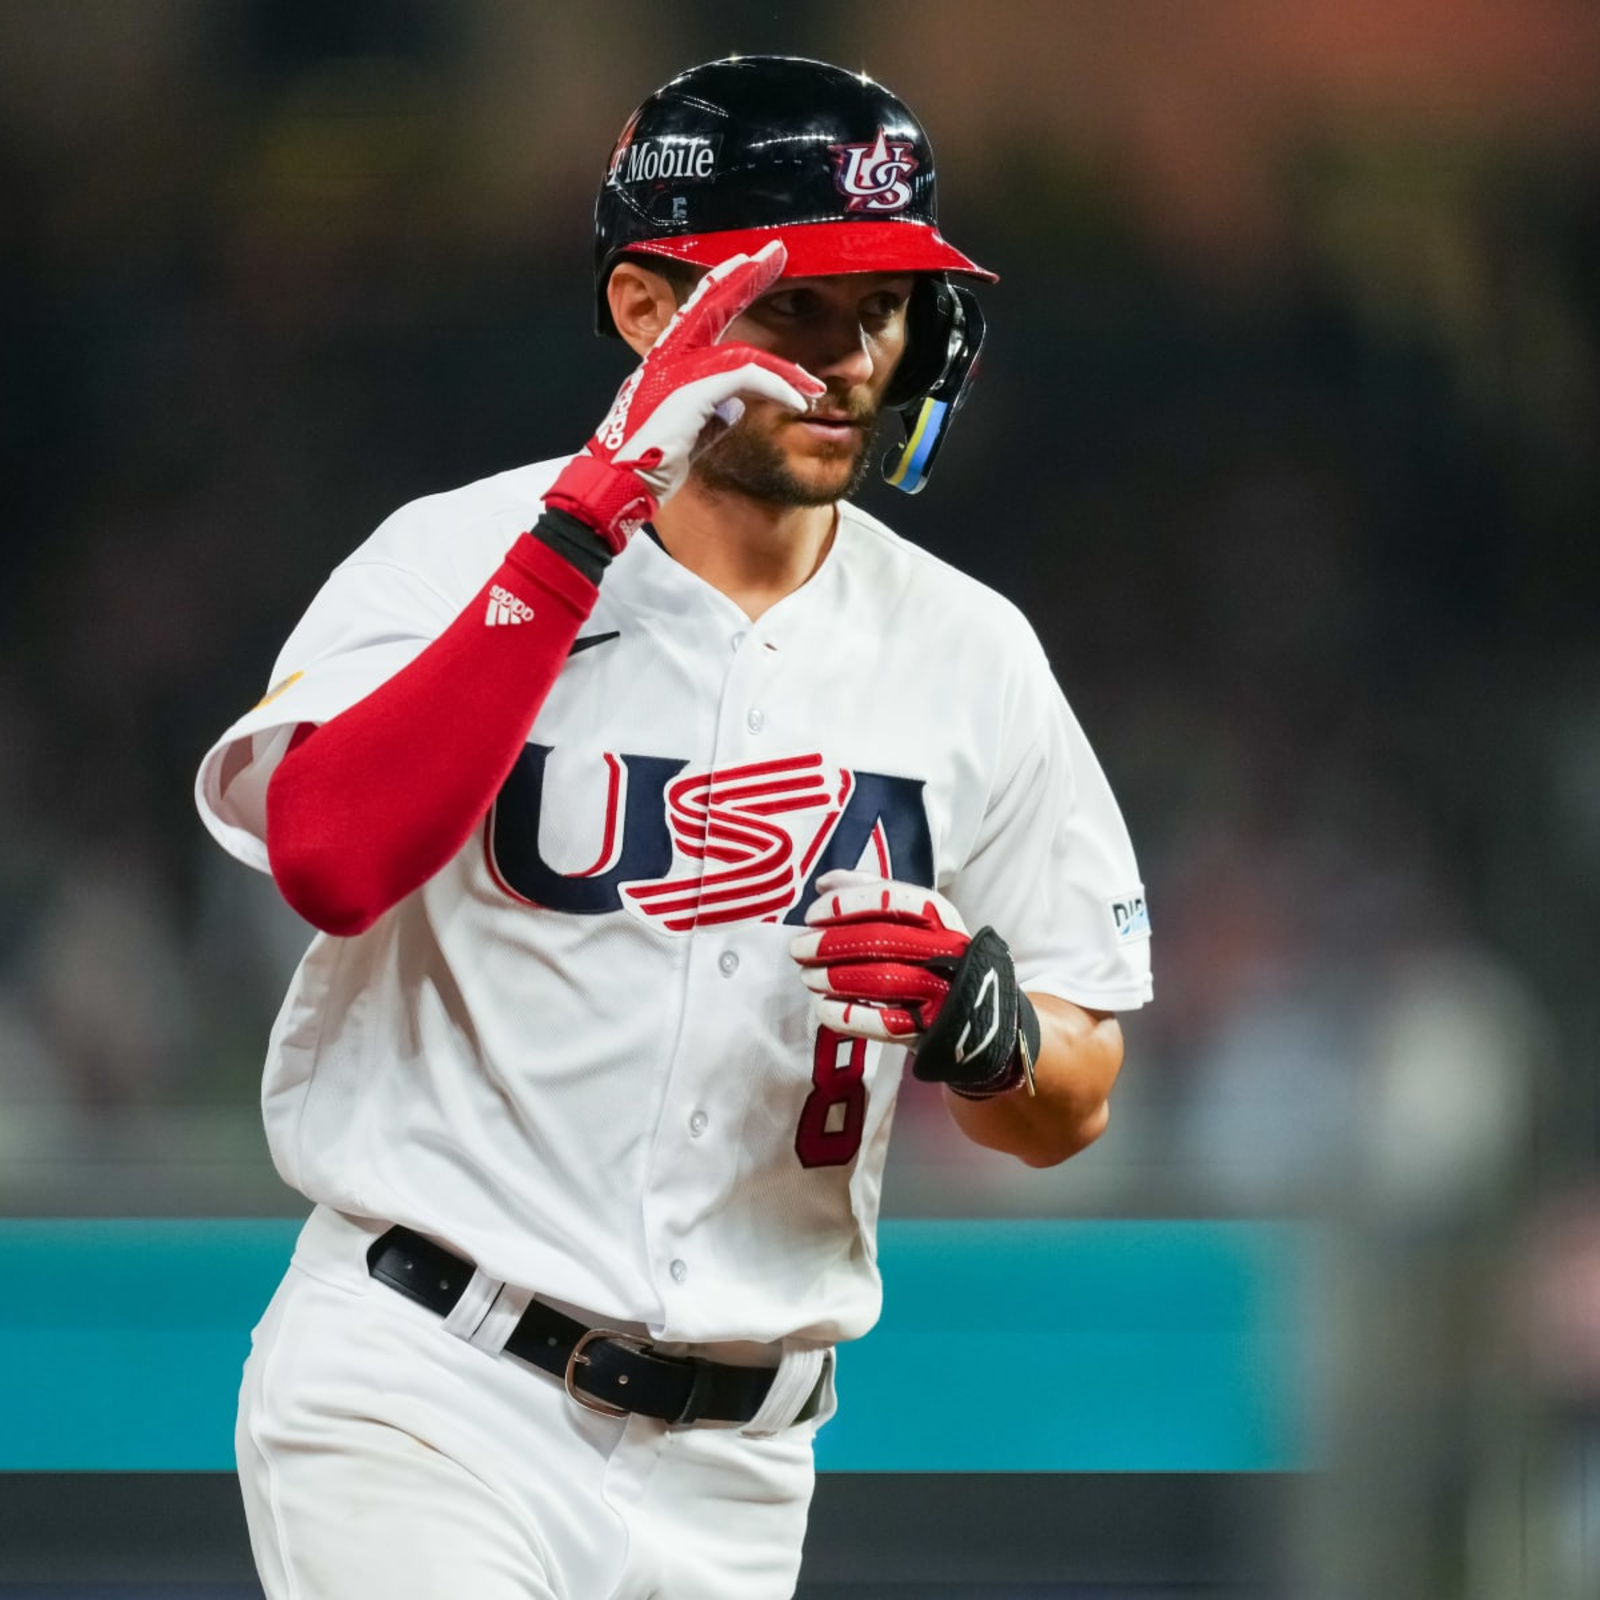 Trea Turner will be part of Team USA in the WBC. : r/baseball